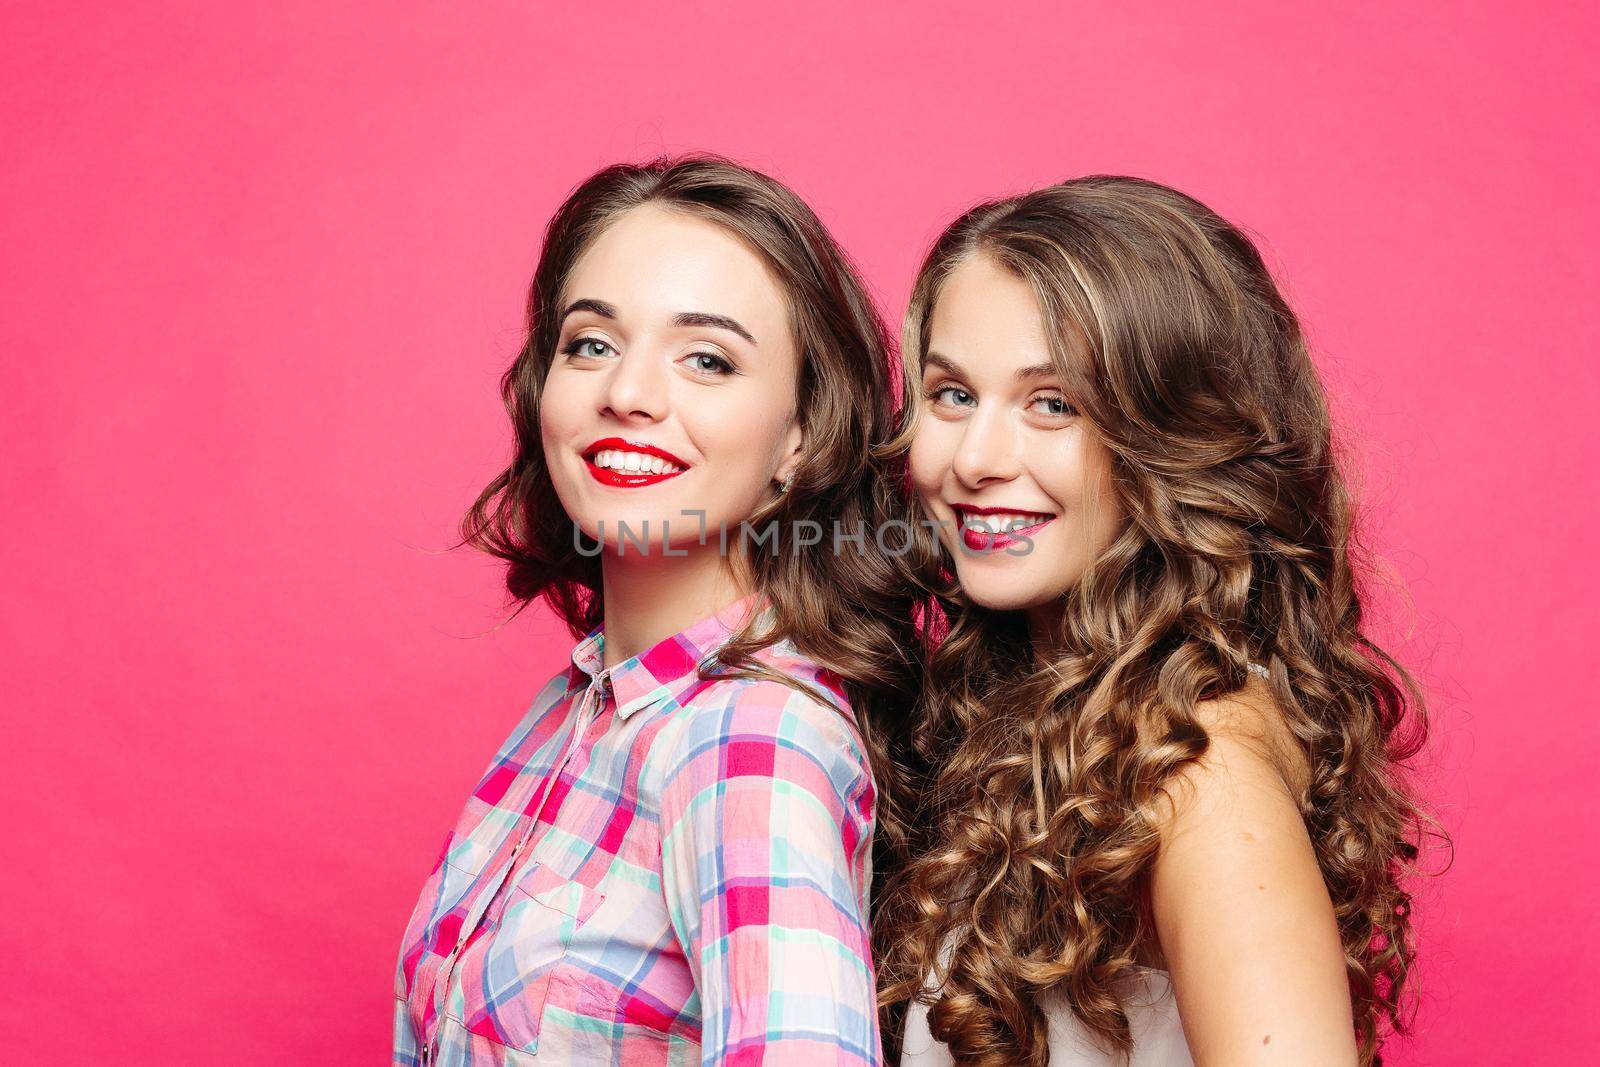 Studio view of beautiful girls with magnificent wavy hair and red lips, in a hipster style with a happy, cute, decomposing smile Isolate on a pink background.